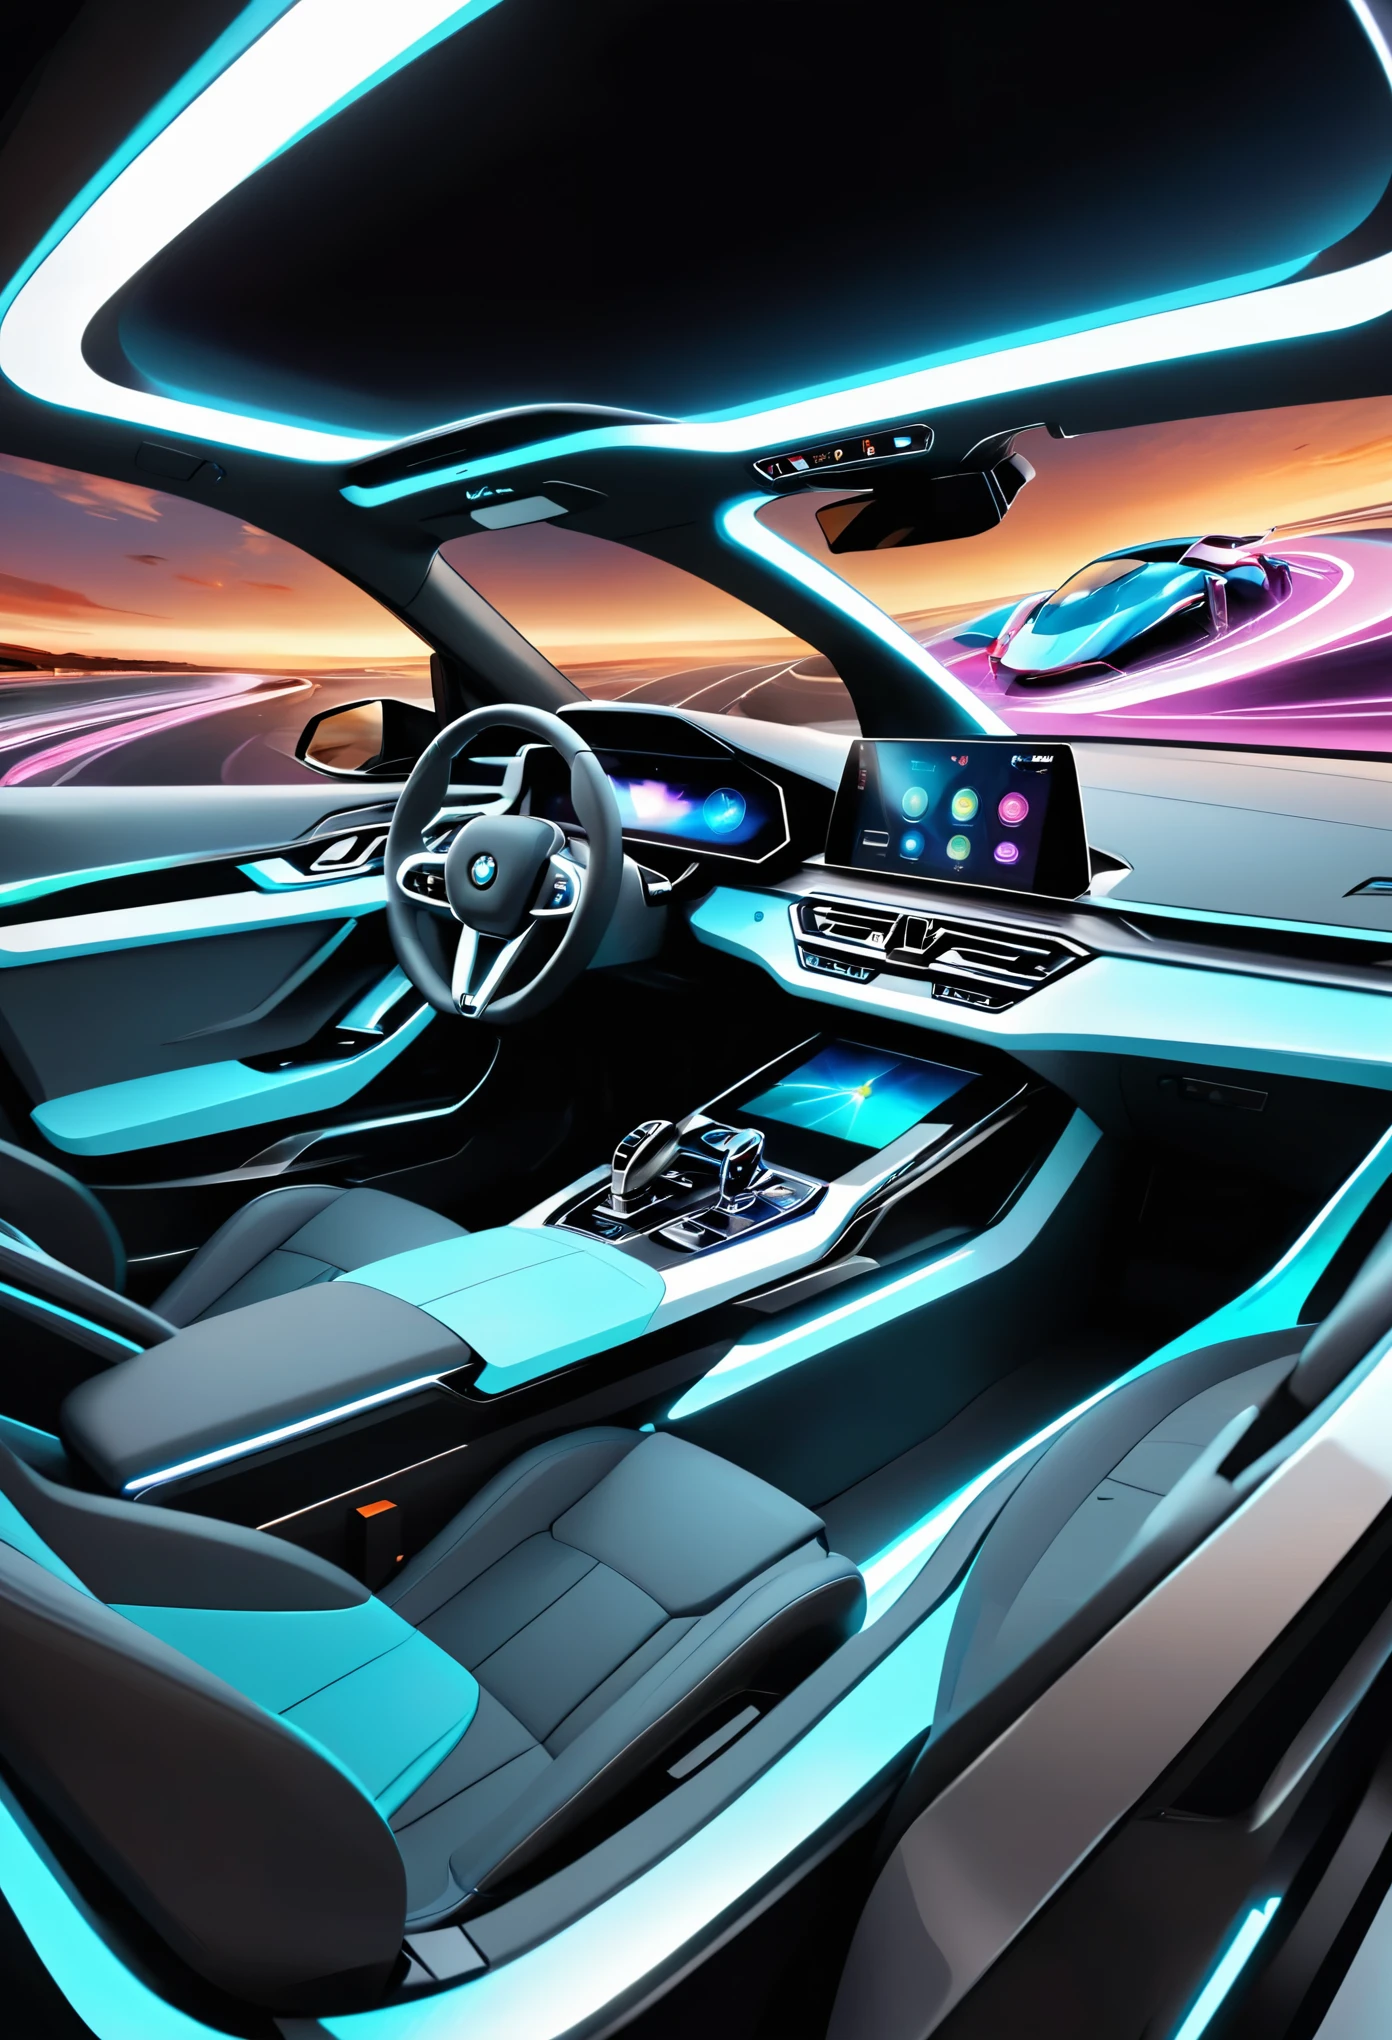 fantastic concept car, future of BMW X5, hyper-realistic design, cutting-edge technology, innovative features, sleek and dynamic body, seamless integration of form and function, bold and striking color scheme, luxurious interior, autonomous driving capabilities, advanced aerodynamics, sustainable energy sources, ultra-high performance, seamless connectivity, intelligent AI assistance, 8K resolution, ultra-detailed rendering, masterful craftsmanship, studio lighting, vivid colors, photo-realistic perfection, futuristic design elements, dynamic lines, sculpted curves, gull-wing doors, interactive holographic display, gesture-controlled interface, multi-touch control panels, augmented reality windshield, panoramic glass roof, state-of-the-art sound system, plush leather seats, ambient lighting, soothing color tones, advanced safety features, adaptive suspension system, intelligent energy management, cutting-edge tire technology, autonomous parking, virtual reality test drive